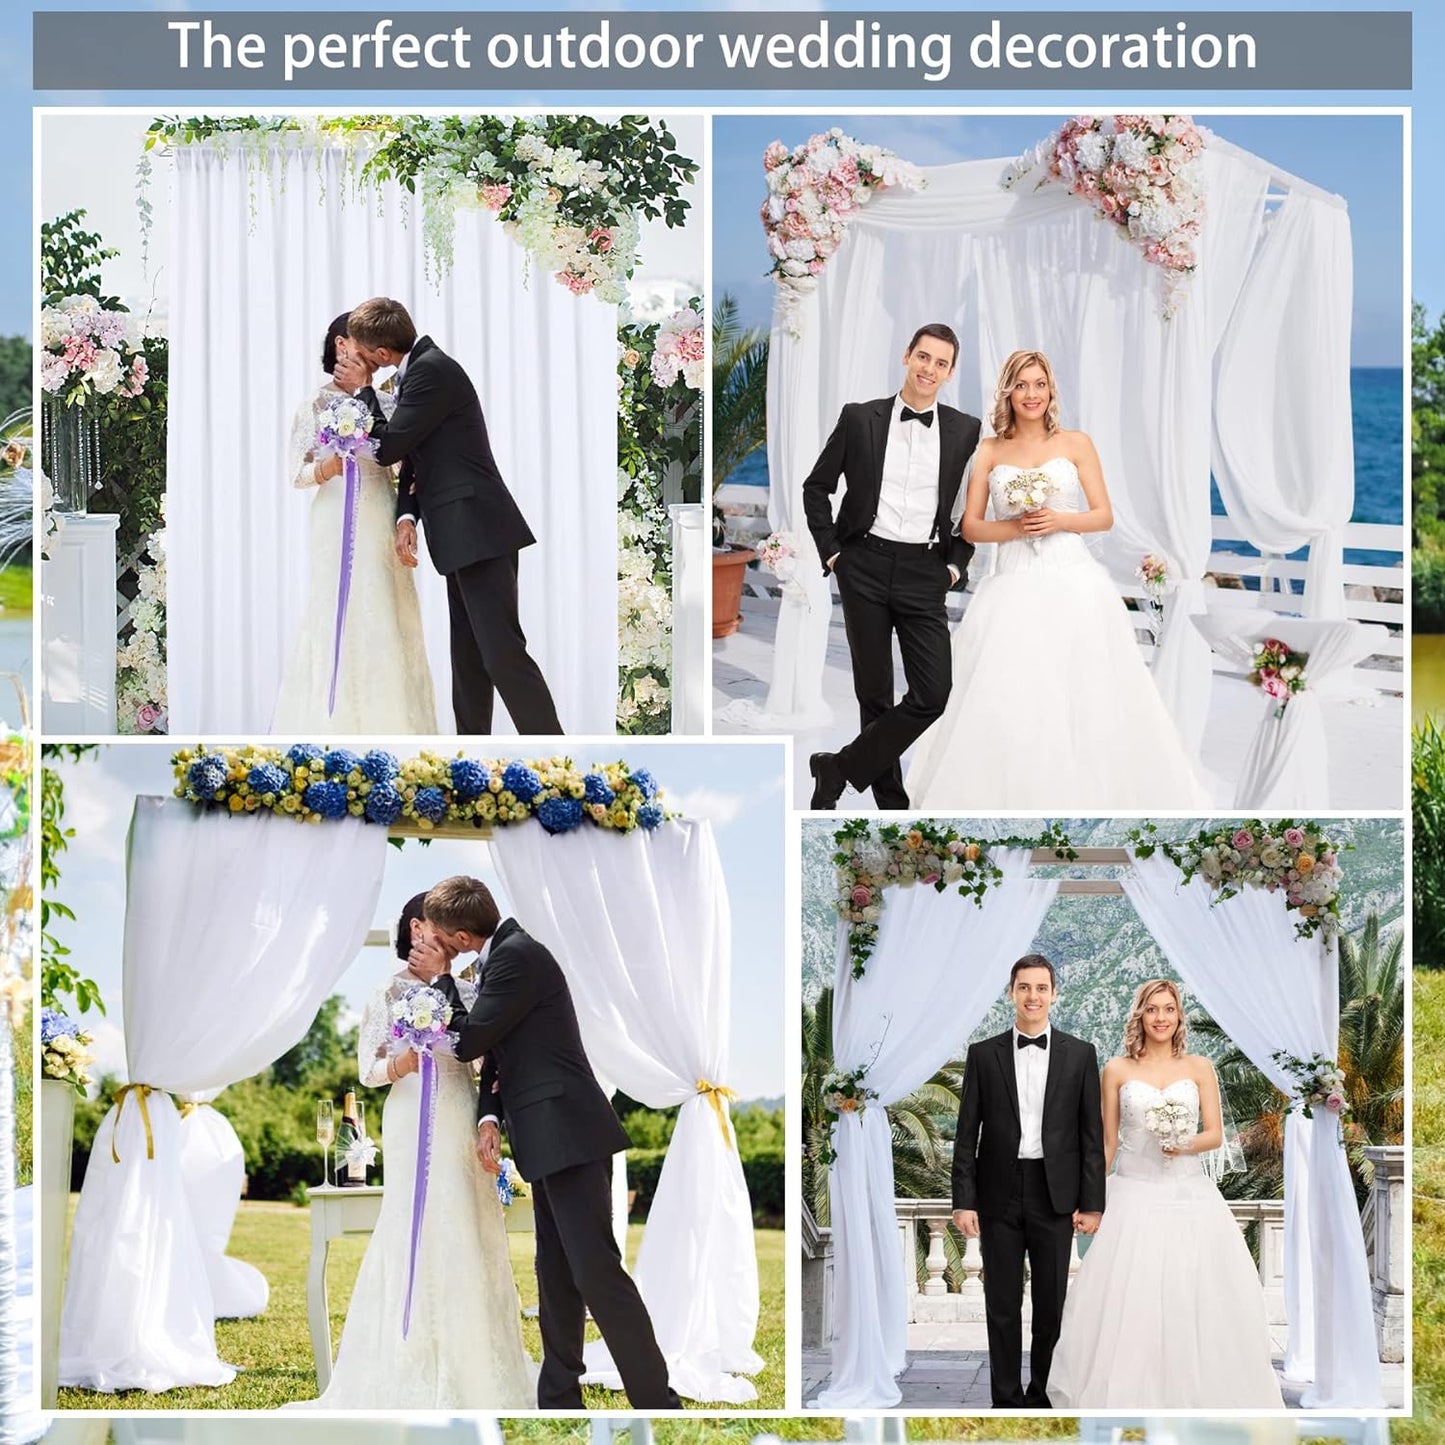 10Ft X 10Ft White Chiffon Backdrop Curtains, Wrinkle-Free Sheer Chiffon Fabric Curtain Drapes for Wedding Ceremony Arch Party Stage Decoration  Wish Care   